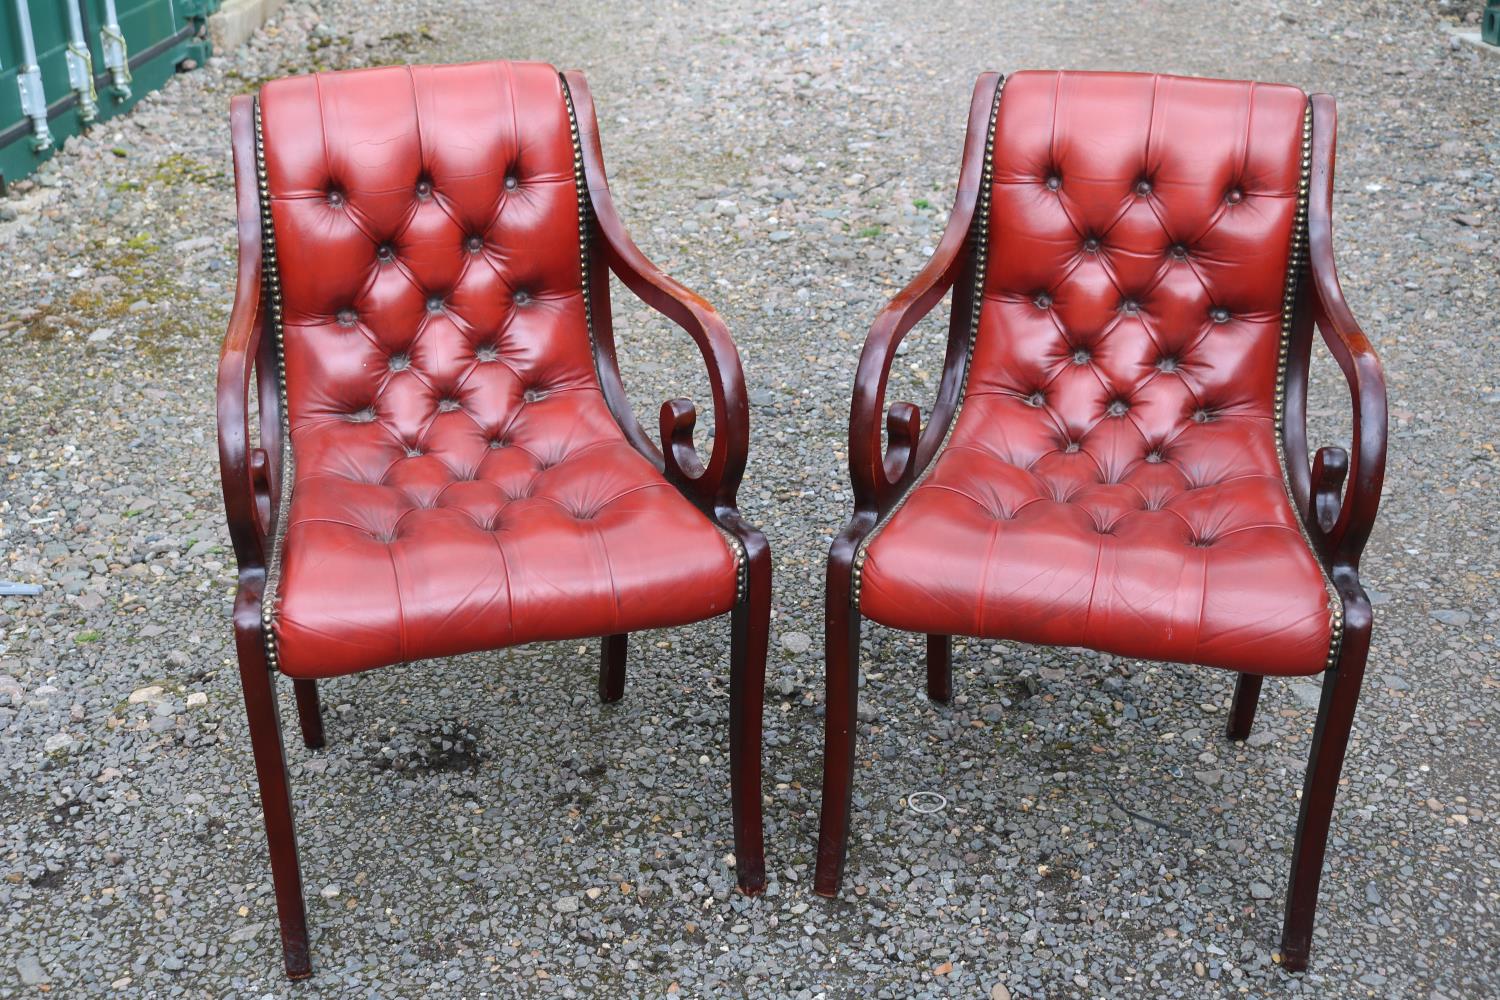 Pair of 20thC Chesterfield Button back Red Leather studded Elbow chairs with scroll arms - Image 2 of 4